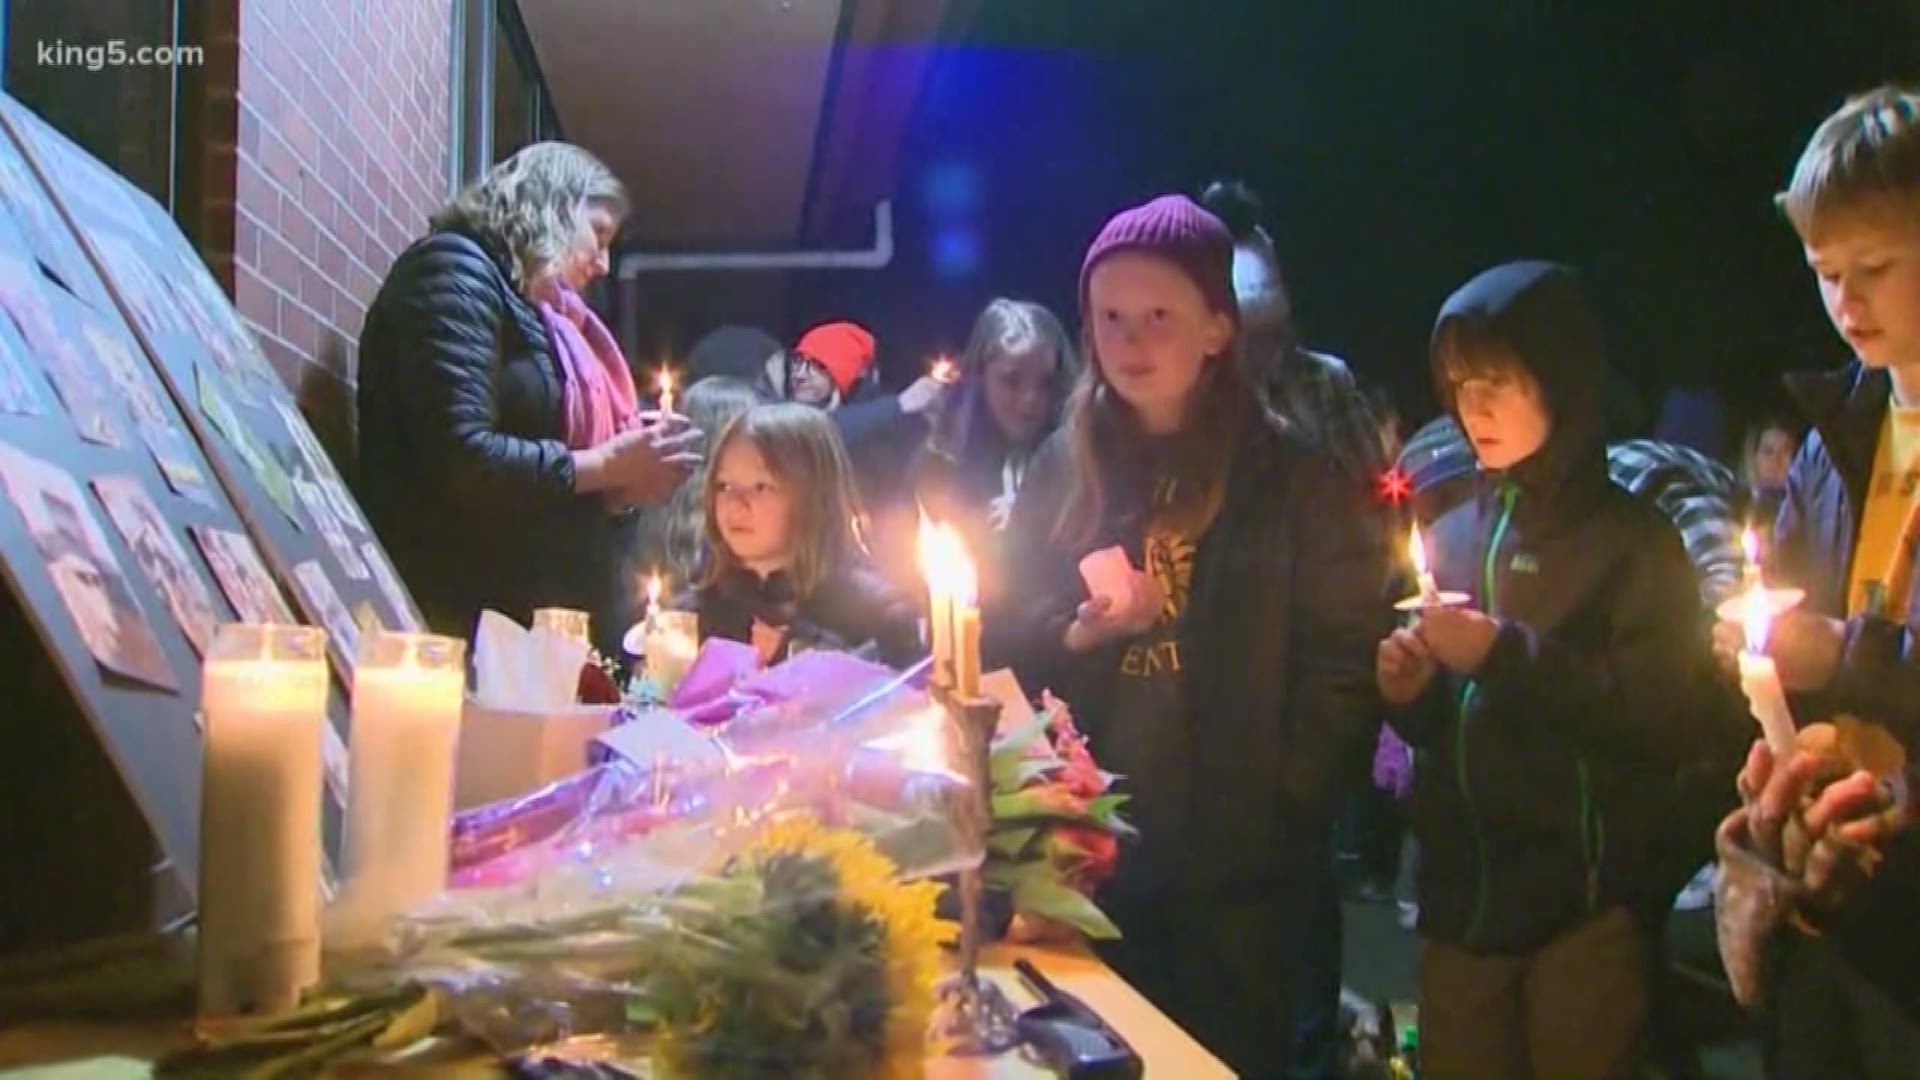 A vigil was held for a principal who was shot dead in her home on Thursday.